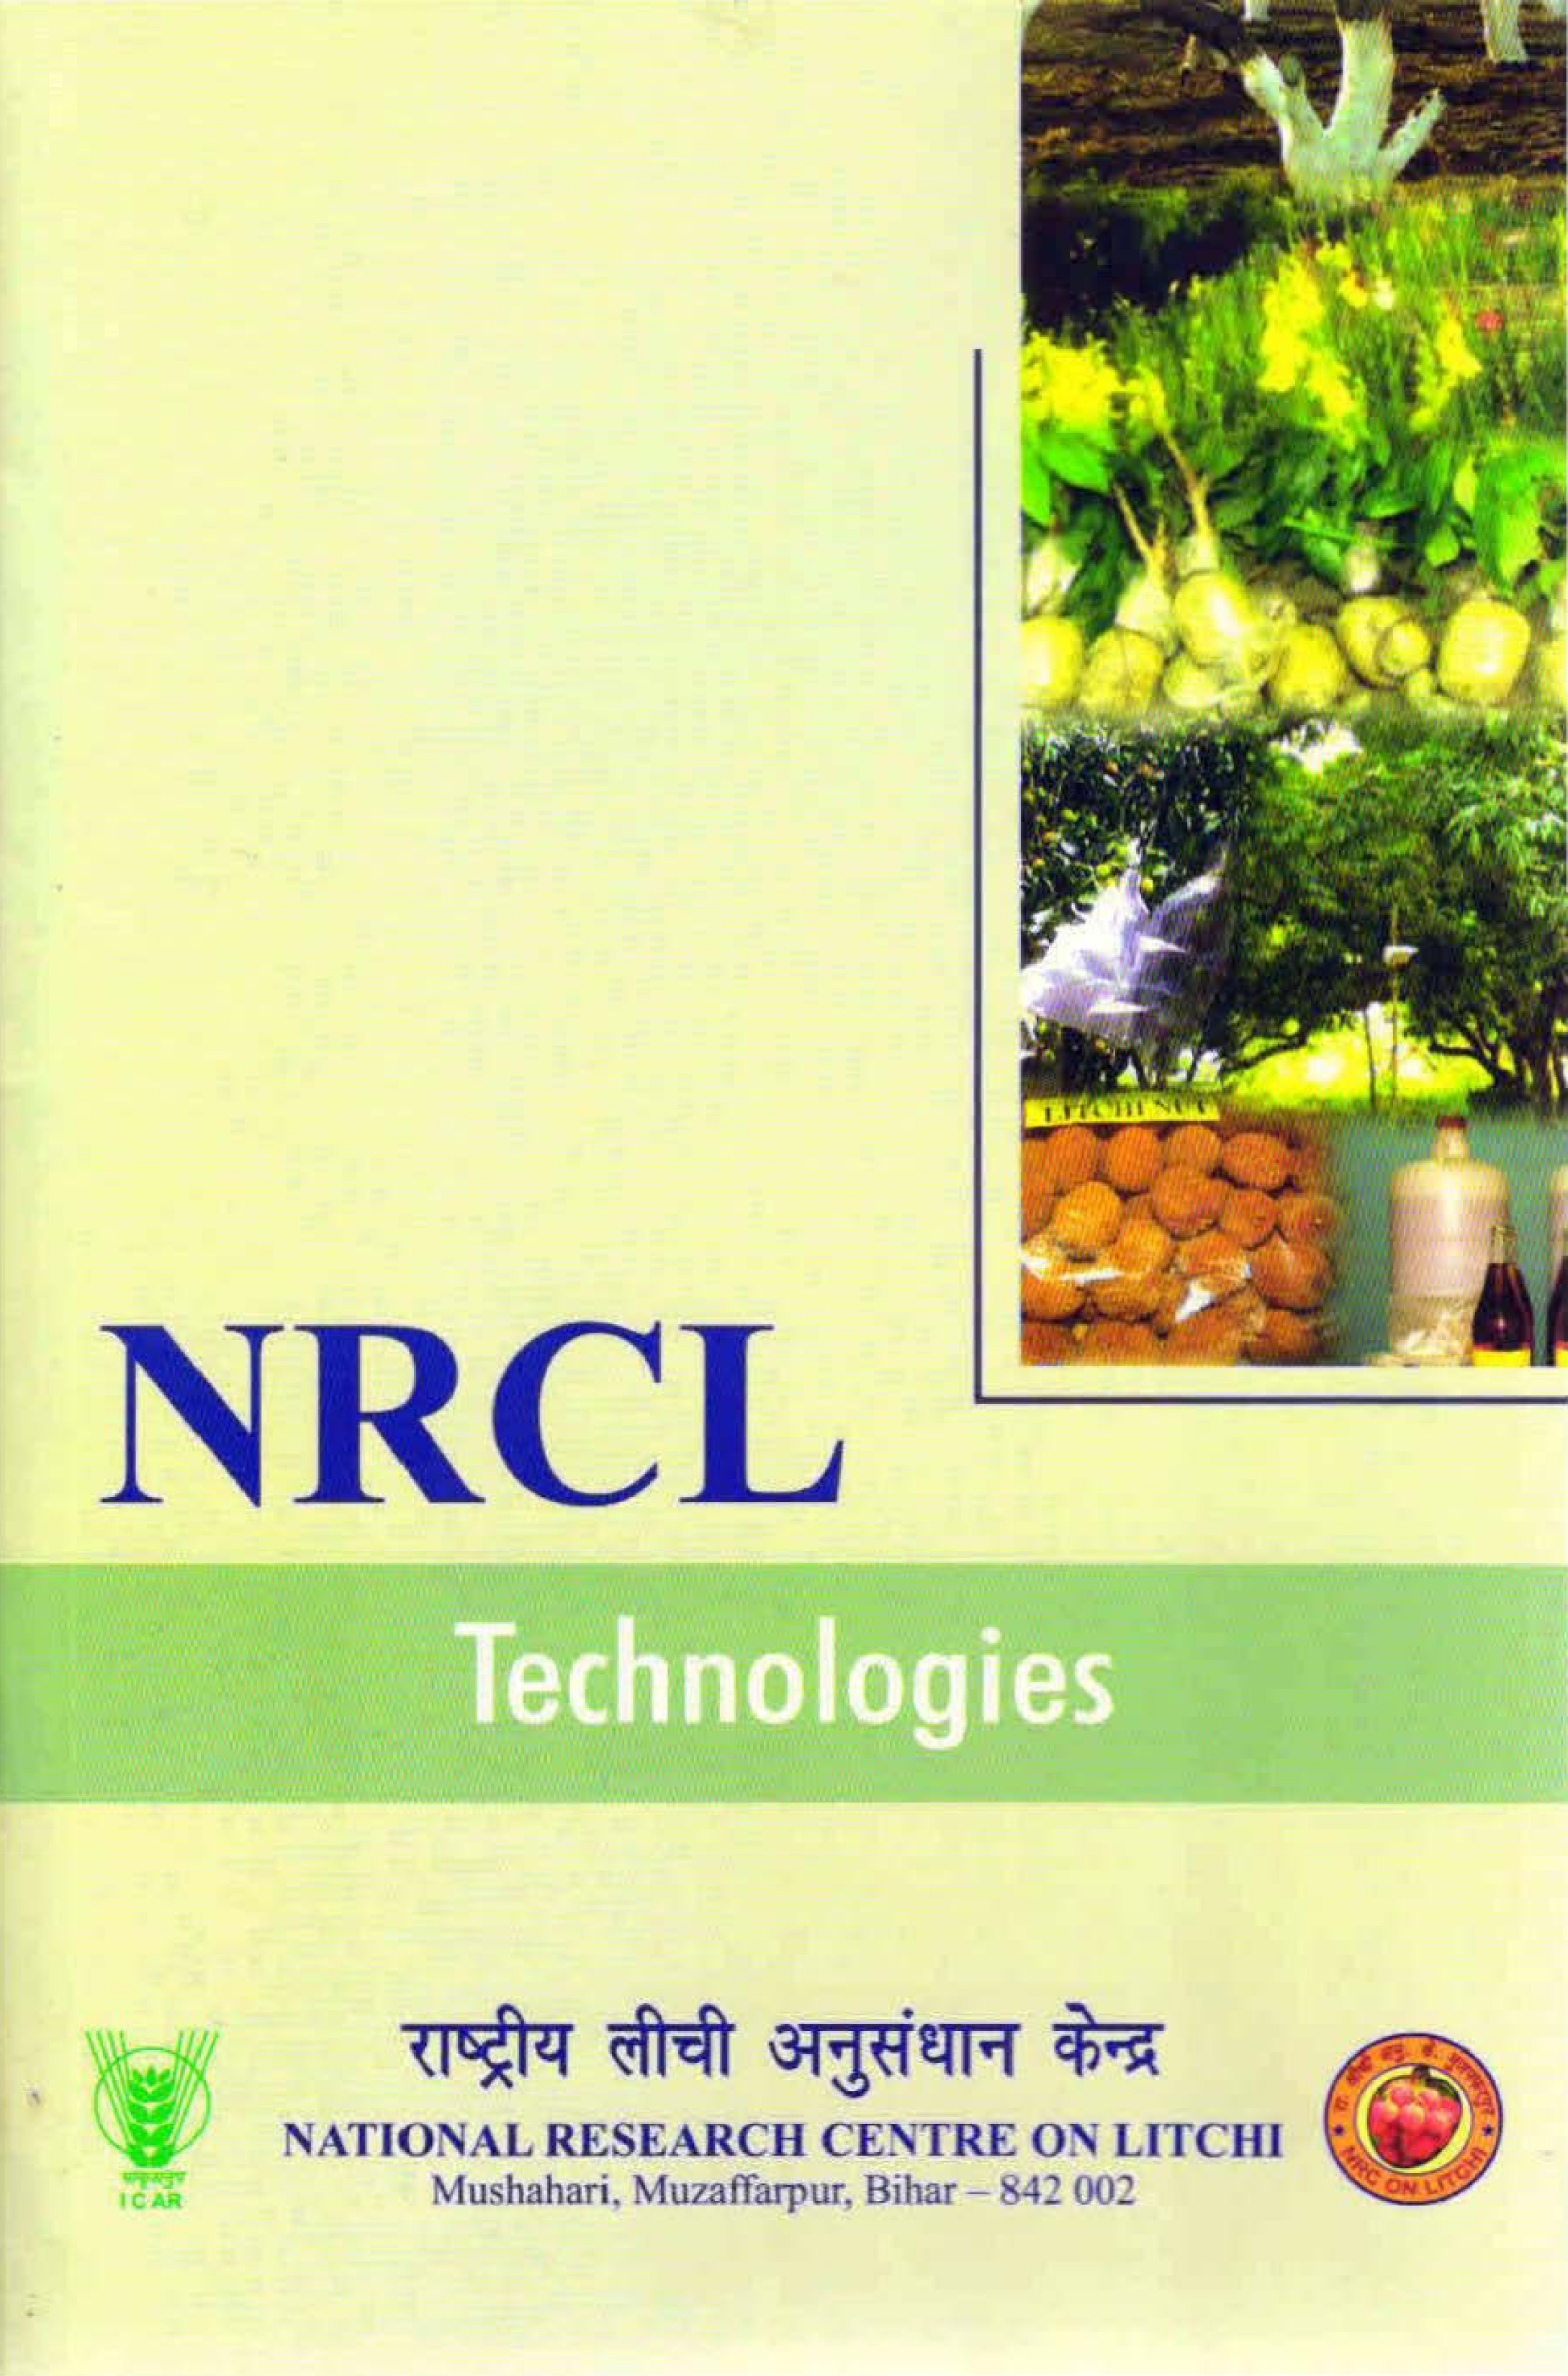 Technologies for Business ventures in Litchi and Allied Sector